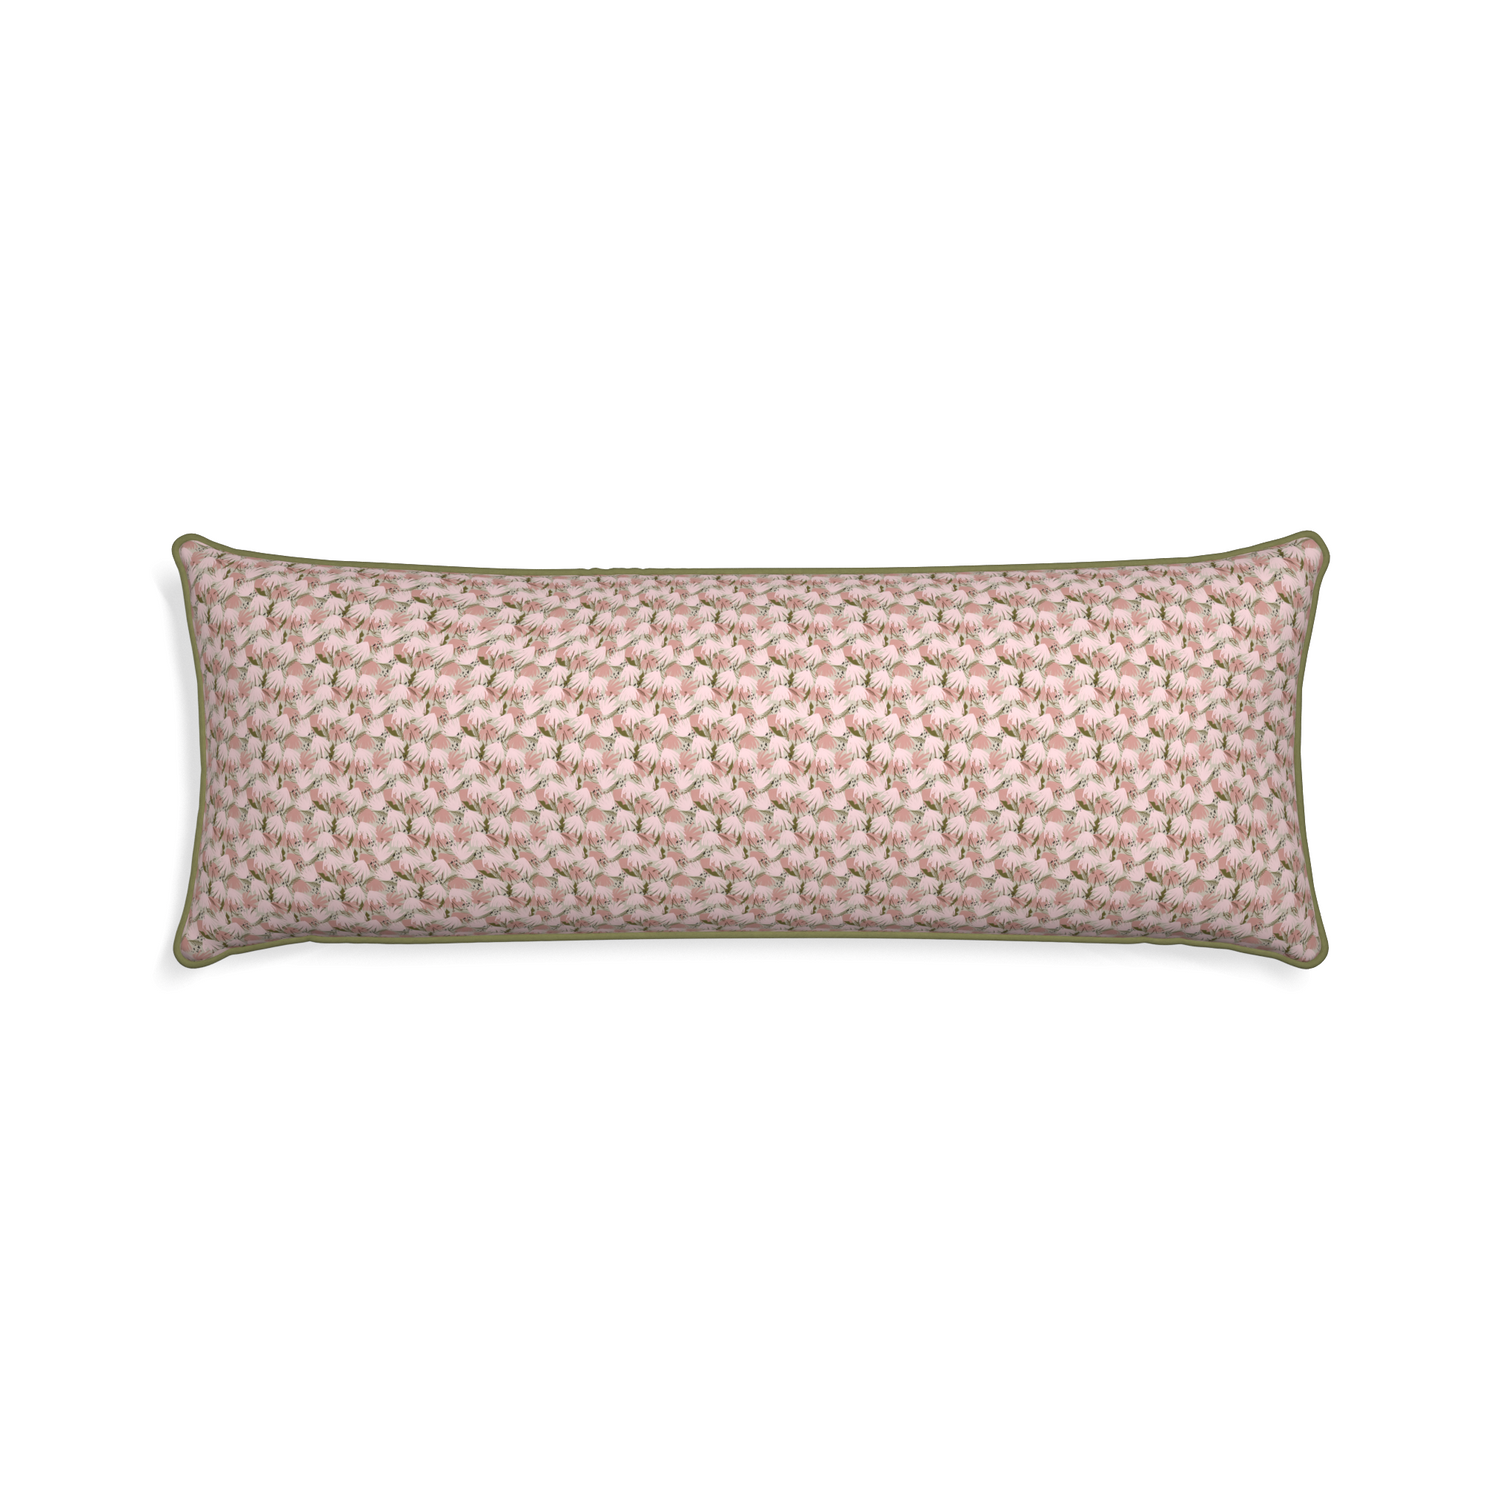 Xl-lumbar eden pink custom pillow with moss piping on white background